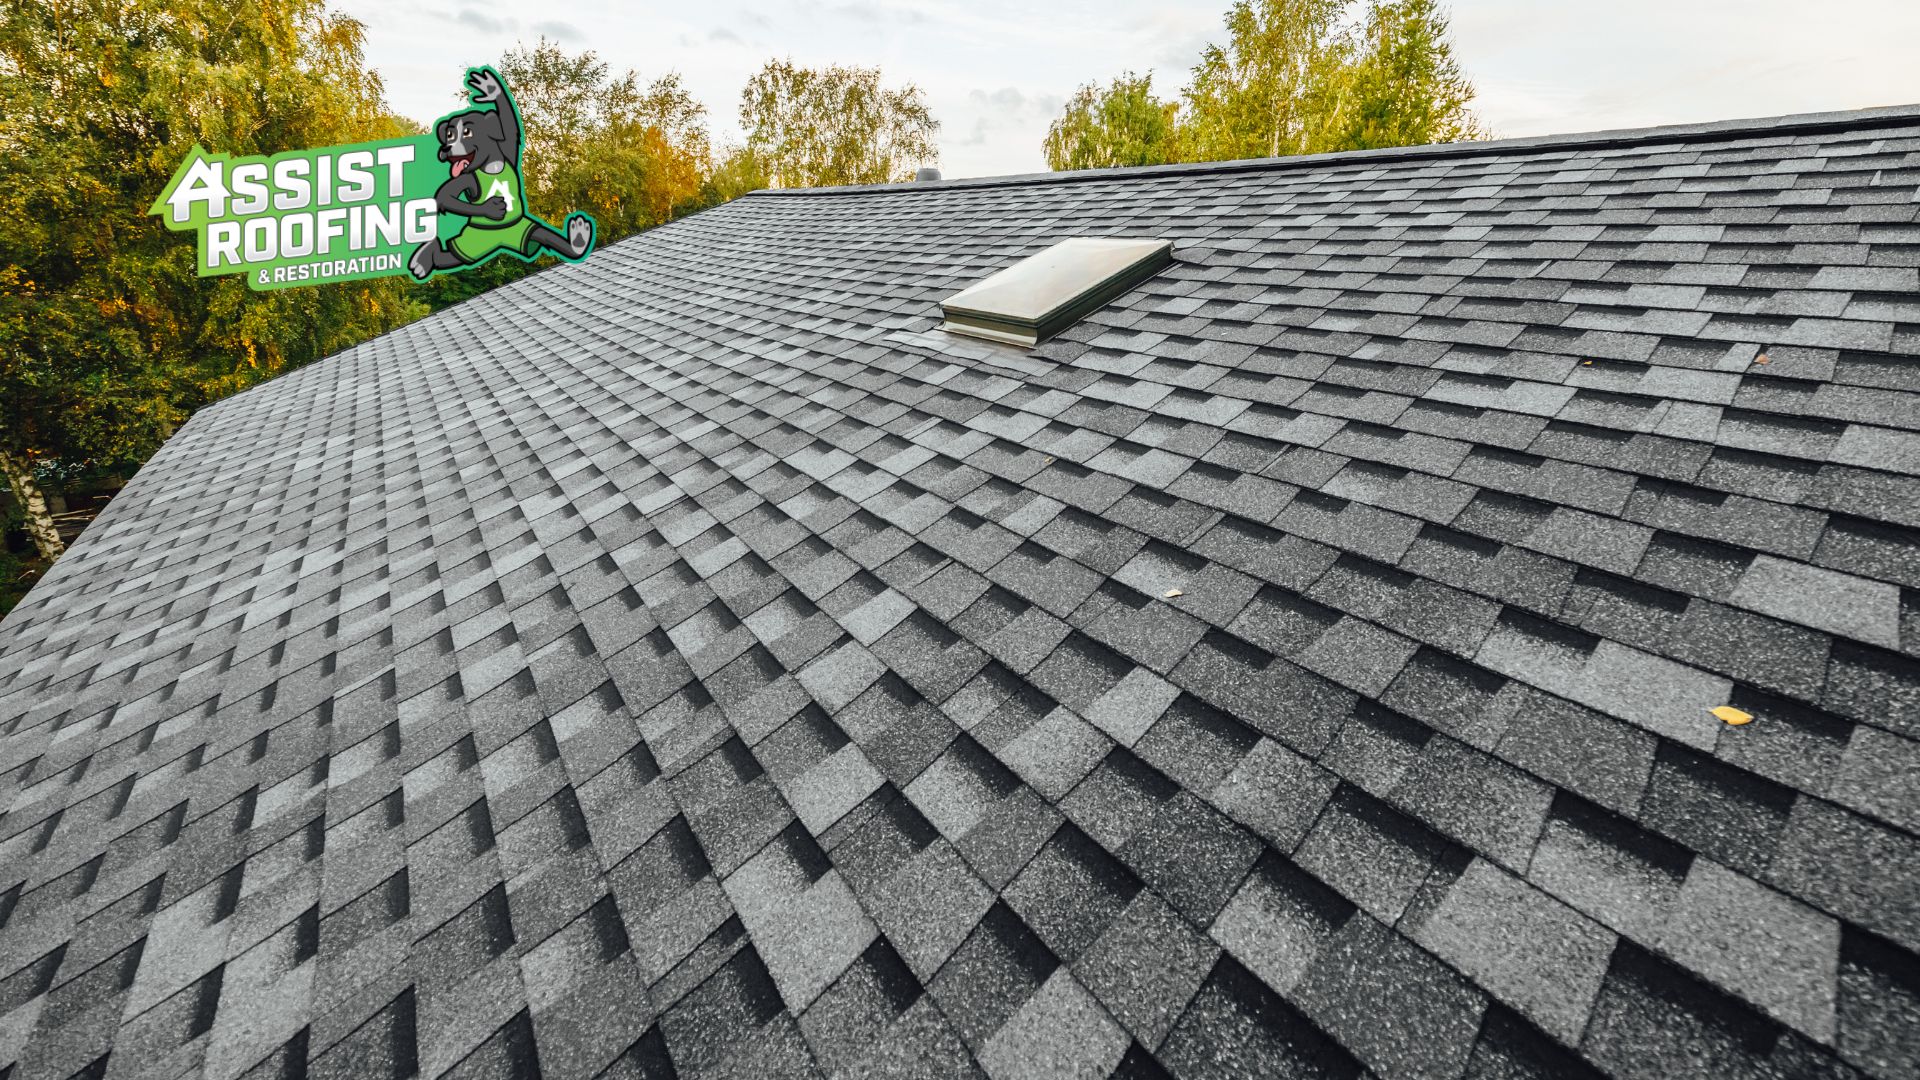 Types of Roof Maintenance: How to Make Your Roof Last in Cincinnati